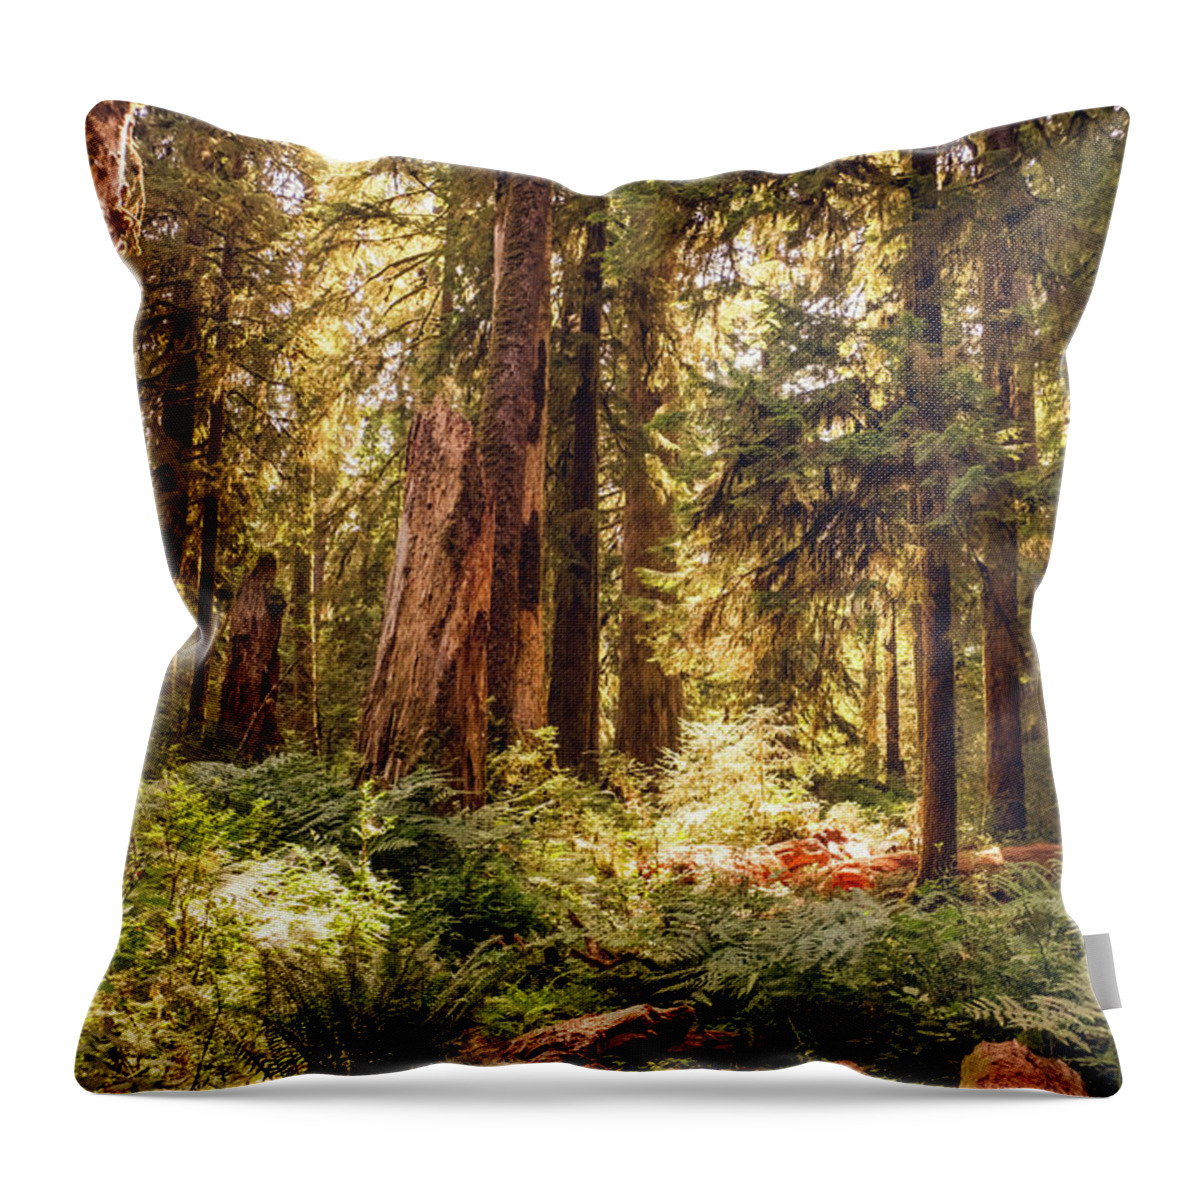 Washington Throw Pillow featuring the photograph Hoh Forest #2 by Alberto Zanoni